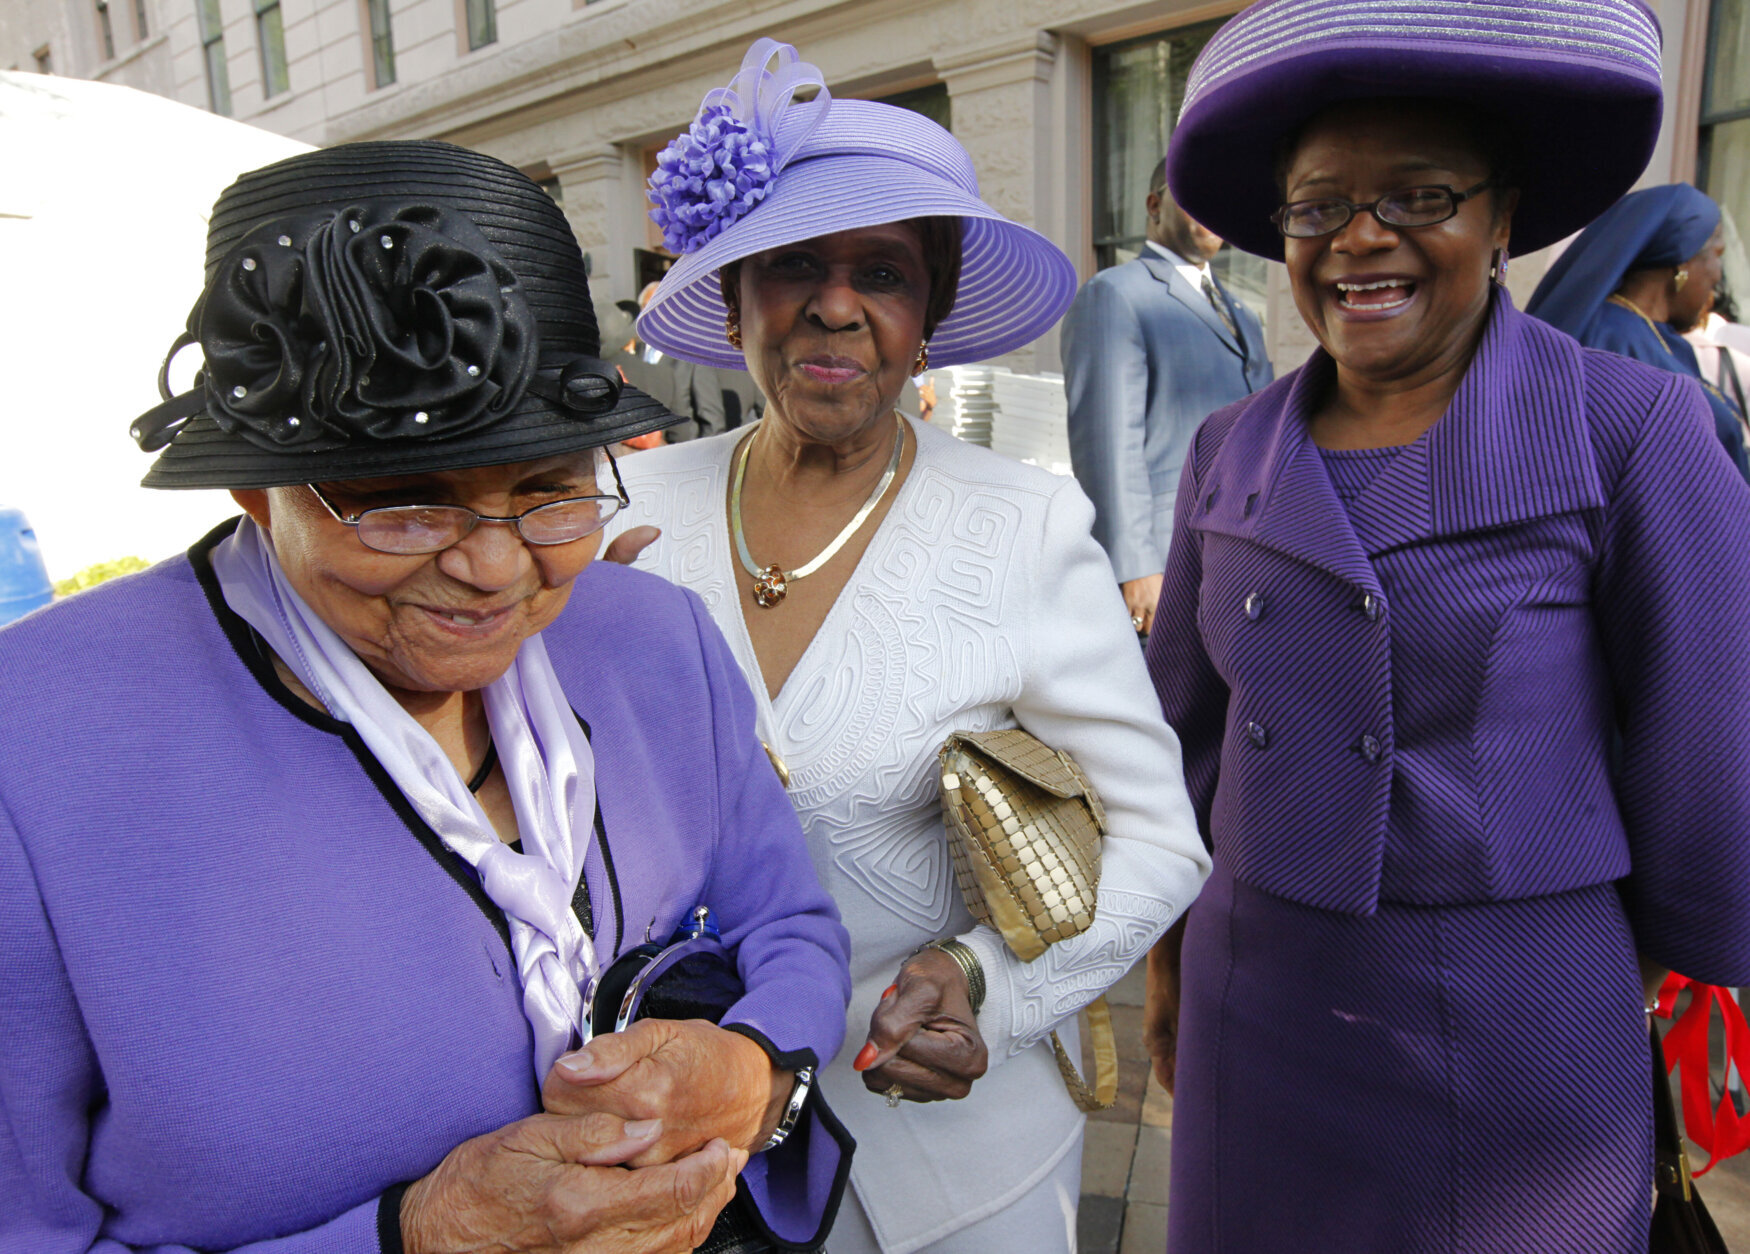 In this April 27, 2010, file photo milliner Vanilla P. Beane, 90, left, talks about her friendship with the late Dorothy Height, the leading female voice of the 1960s civil rights movement, outside the National Council of Negro Women building in Washington, where Height's casket arrived for public viewing.  When Height died at age 98 this spring, some of her friends and admirers wore hats to her funeral as a final tribute, Beane among them. And many of the women also wore purple, Height's favorite color.  (AP Photo/J. Scott Applewhite, File)